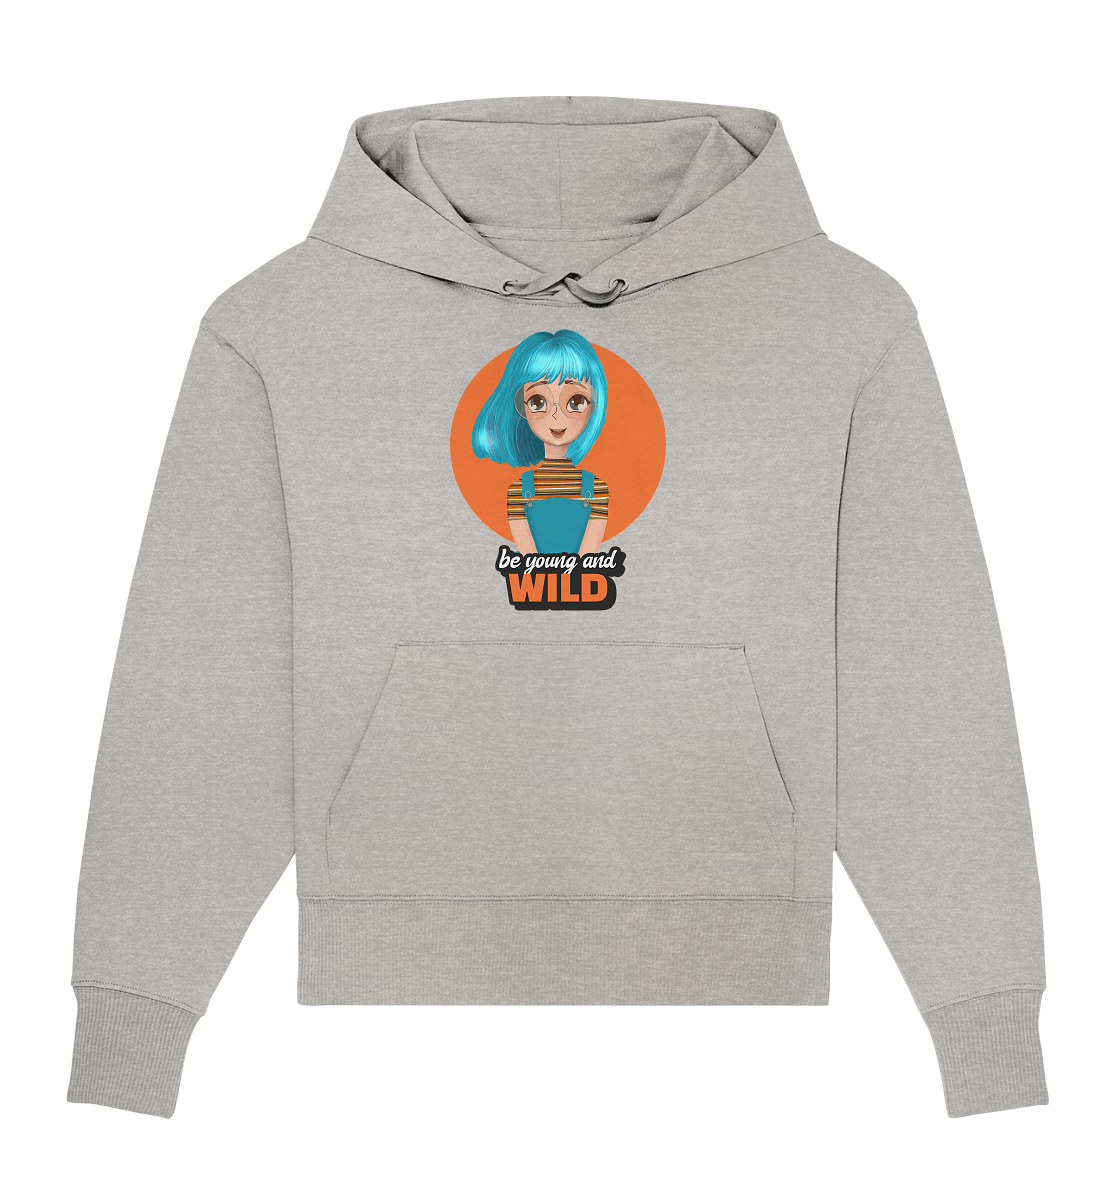 Comic Oversize Hoodie in grau be young and wild von BLOOMINIC